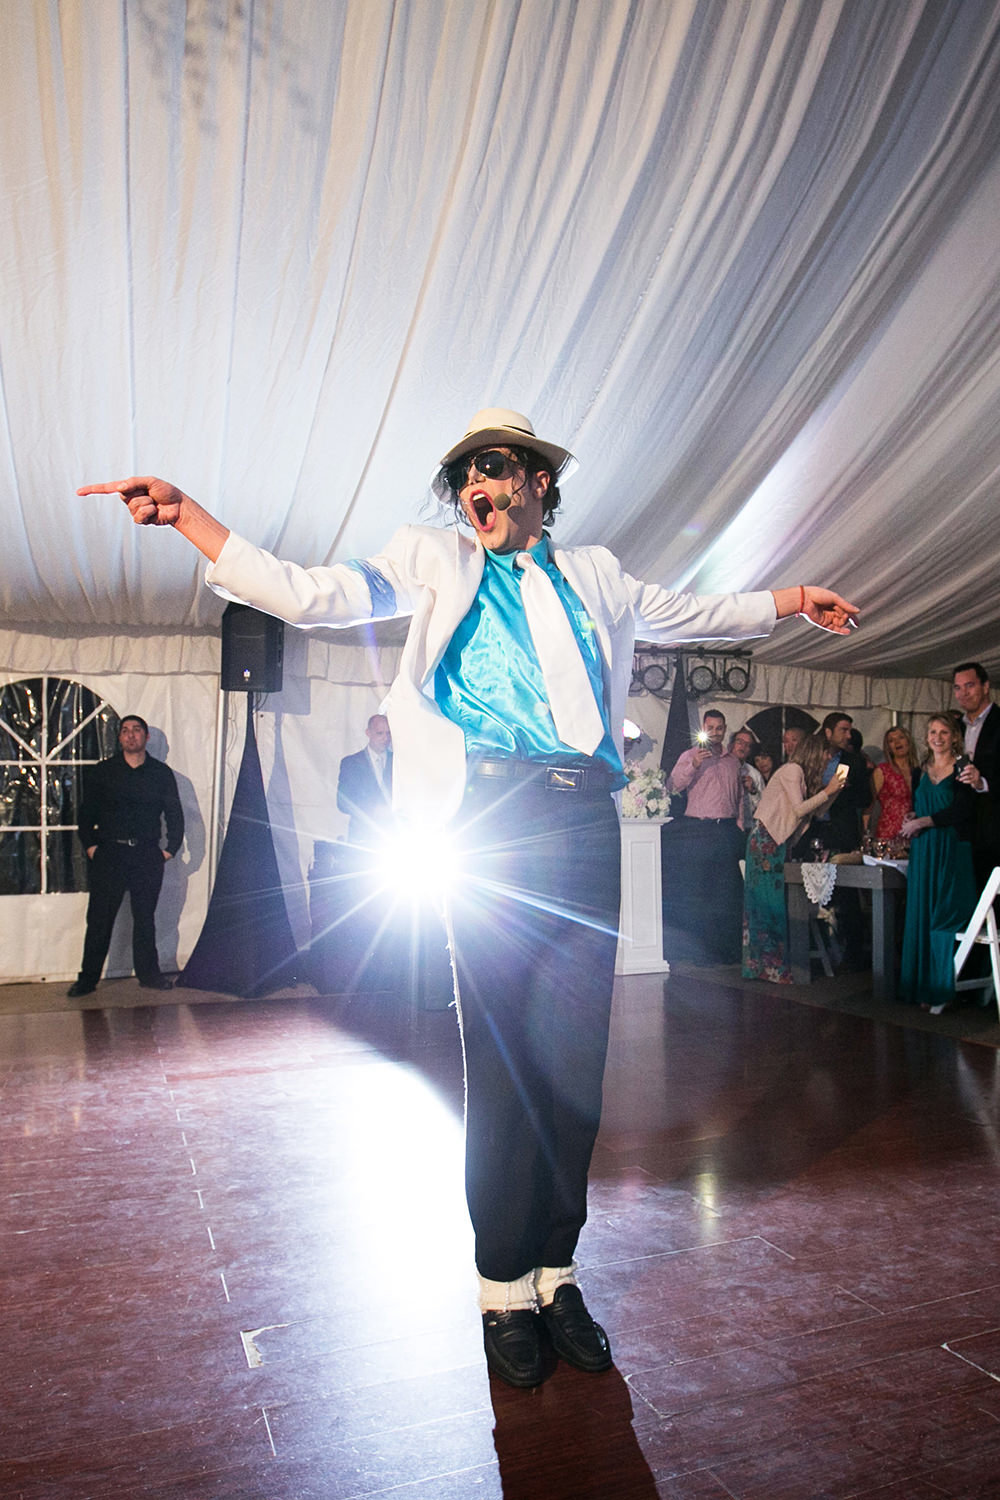 Michael Jackson puts on an amazing performance at this Twin Oaks Wedding Reception